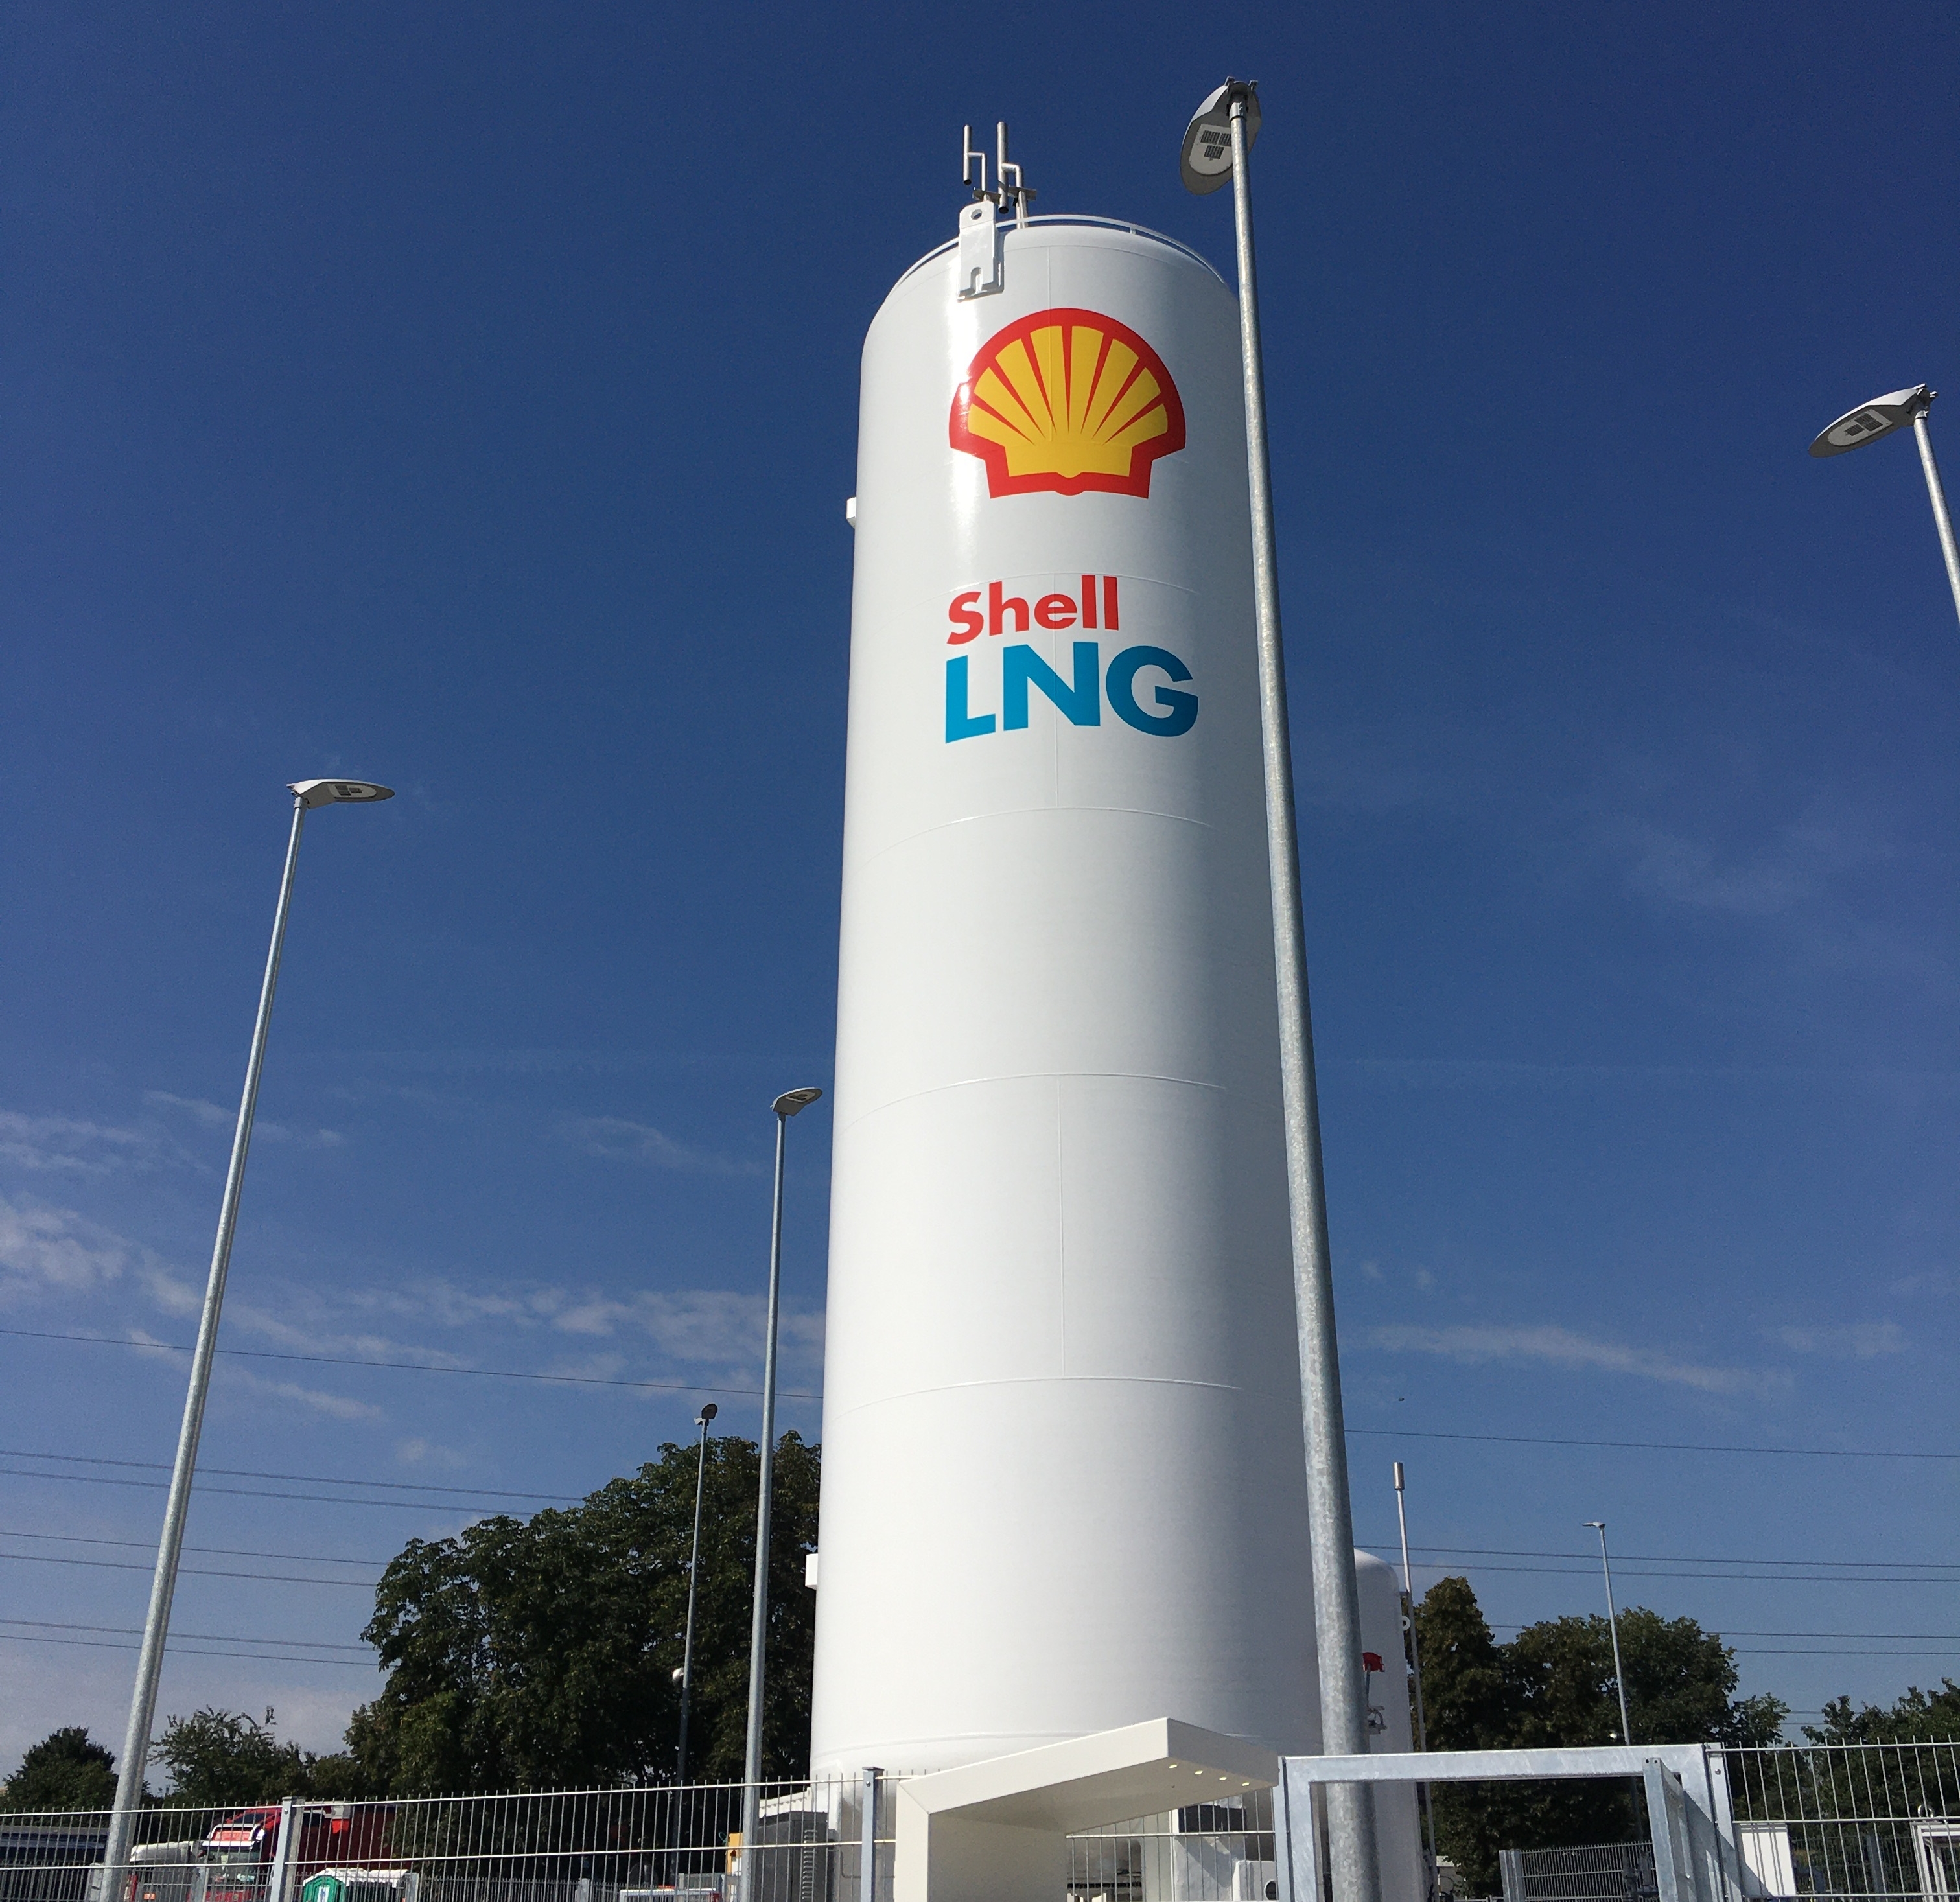 Shell opens its fifth LNG-fueling station in Germany